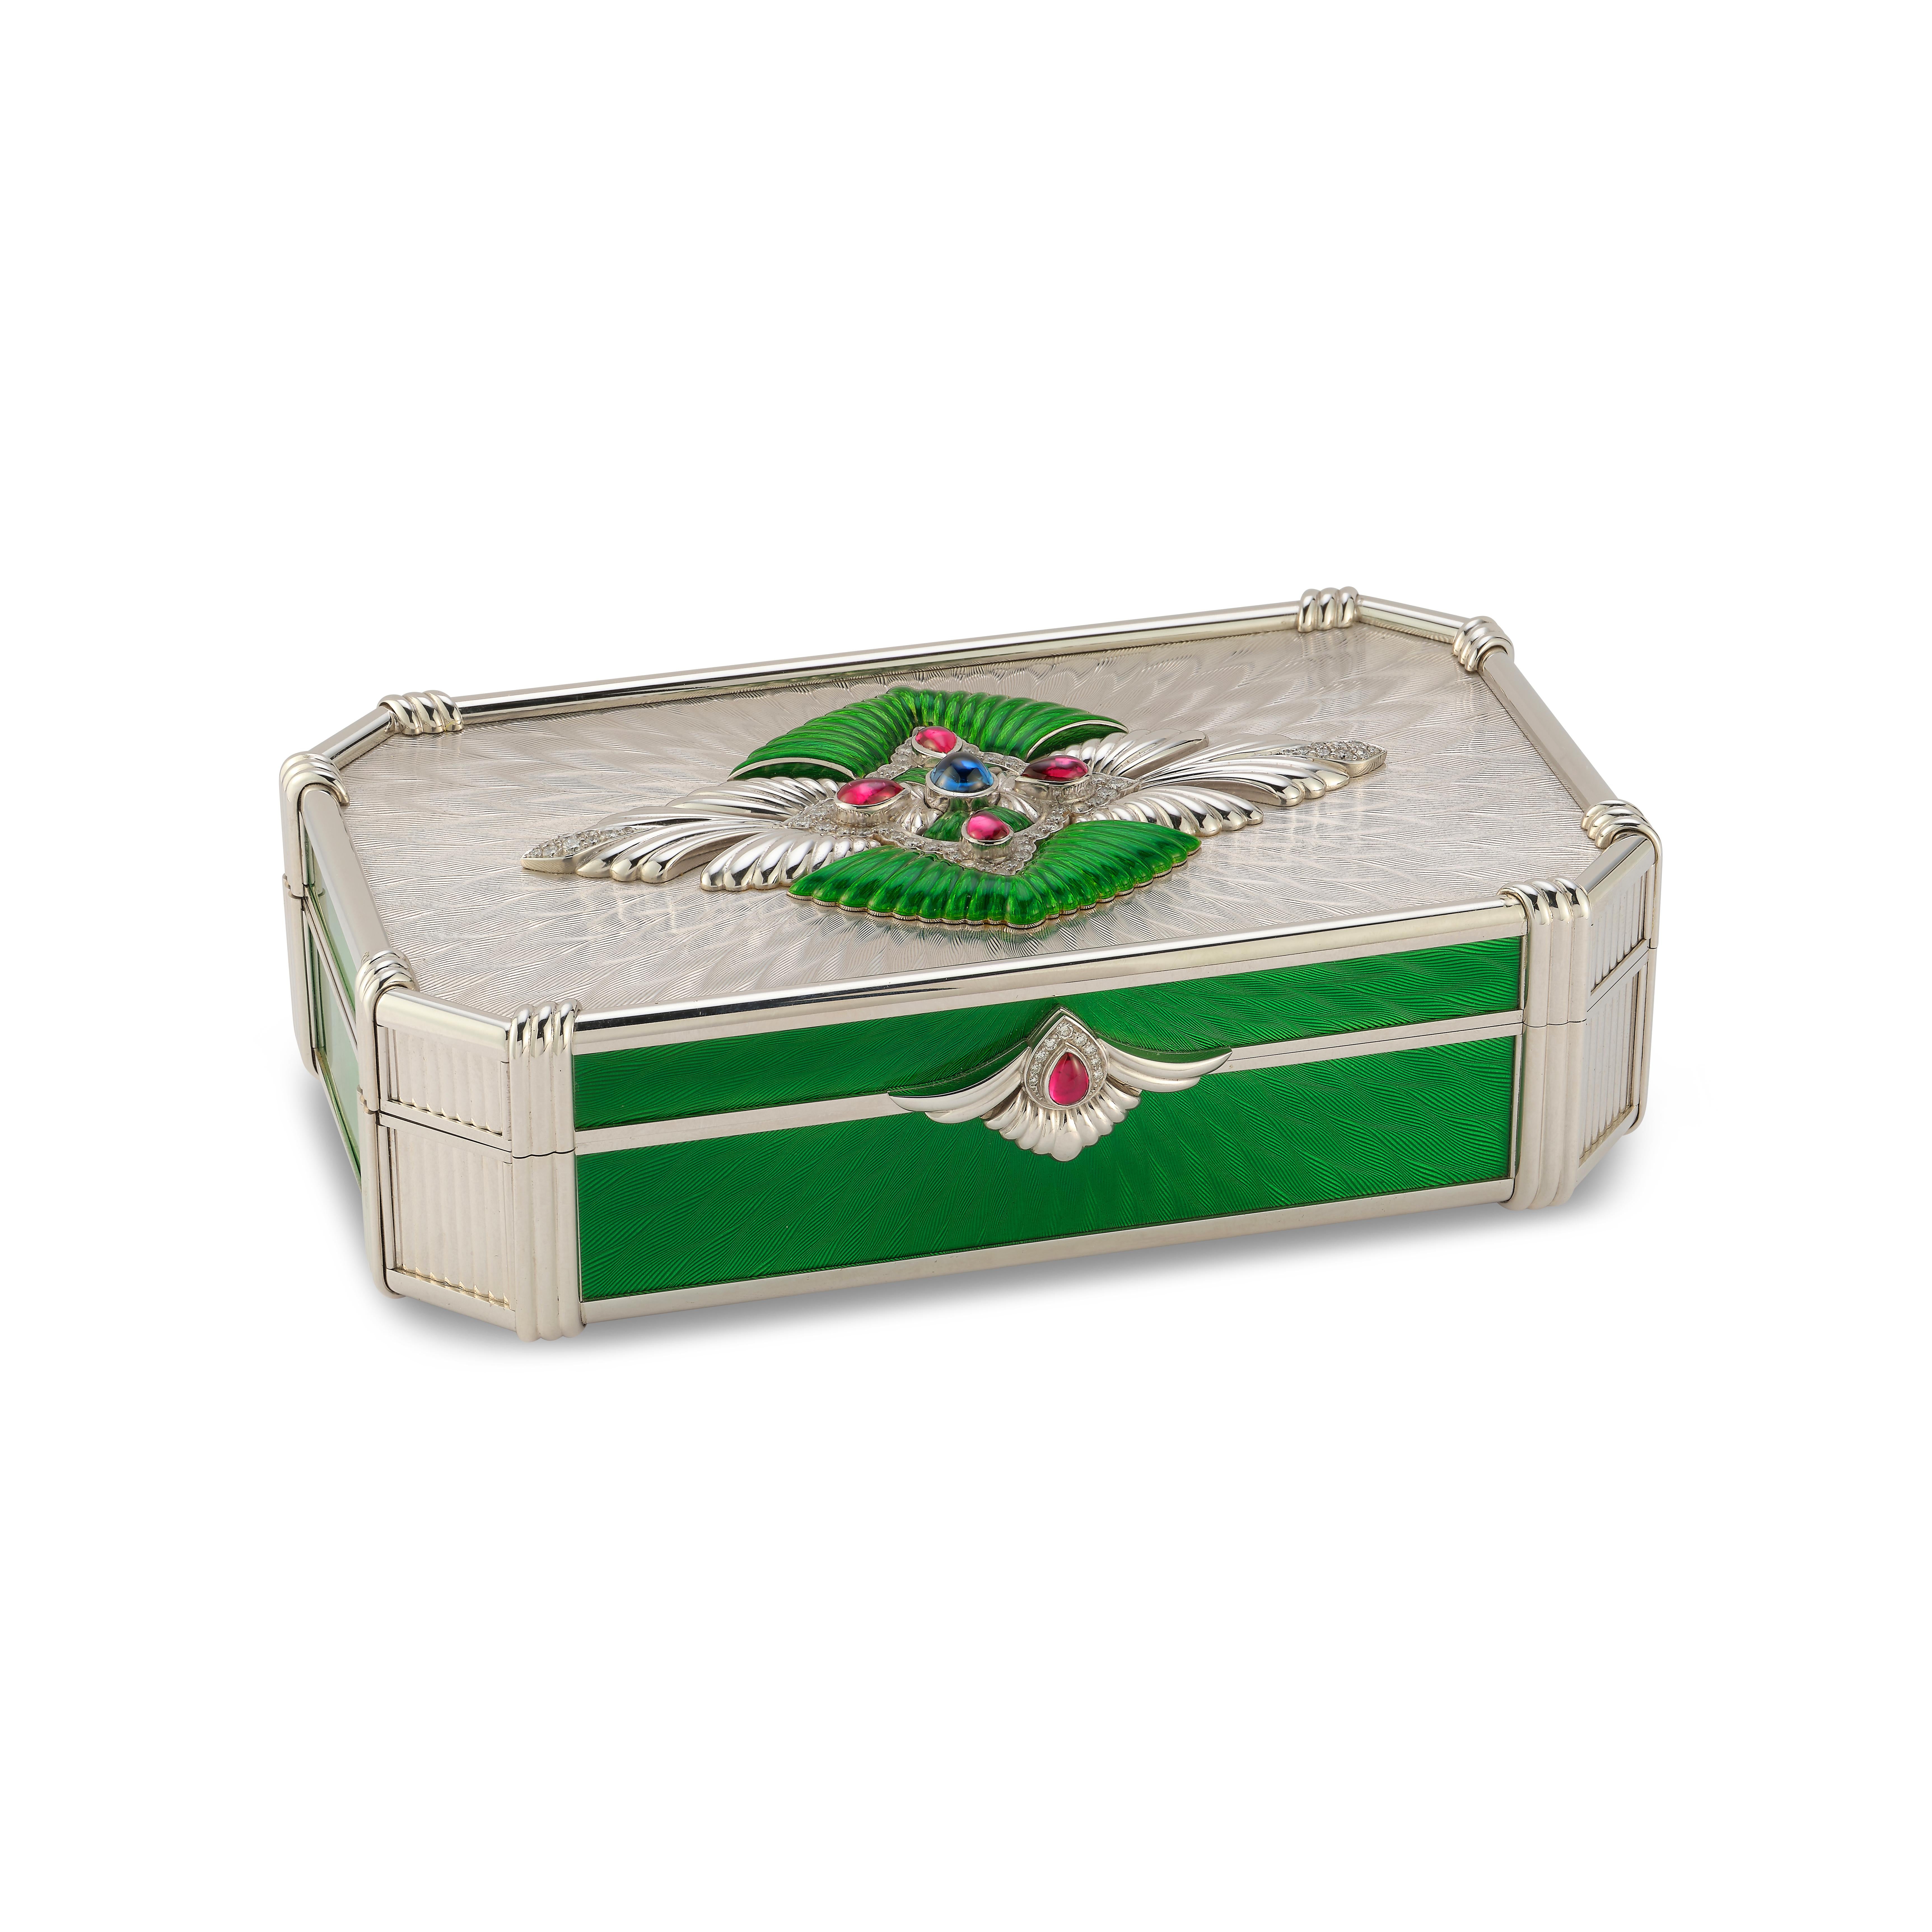 Garrard & Co. Enamel and Gem Set Box -

An 18 karat white gold box with green enamel set with a cabochon sapphire, 5 cabochon rubies, and 75 round diamonds weighing approximately 1.8 carats

Signed G & Co LD
Stamped 750

Measurements: 5.75